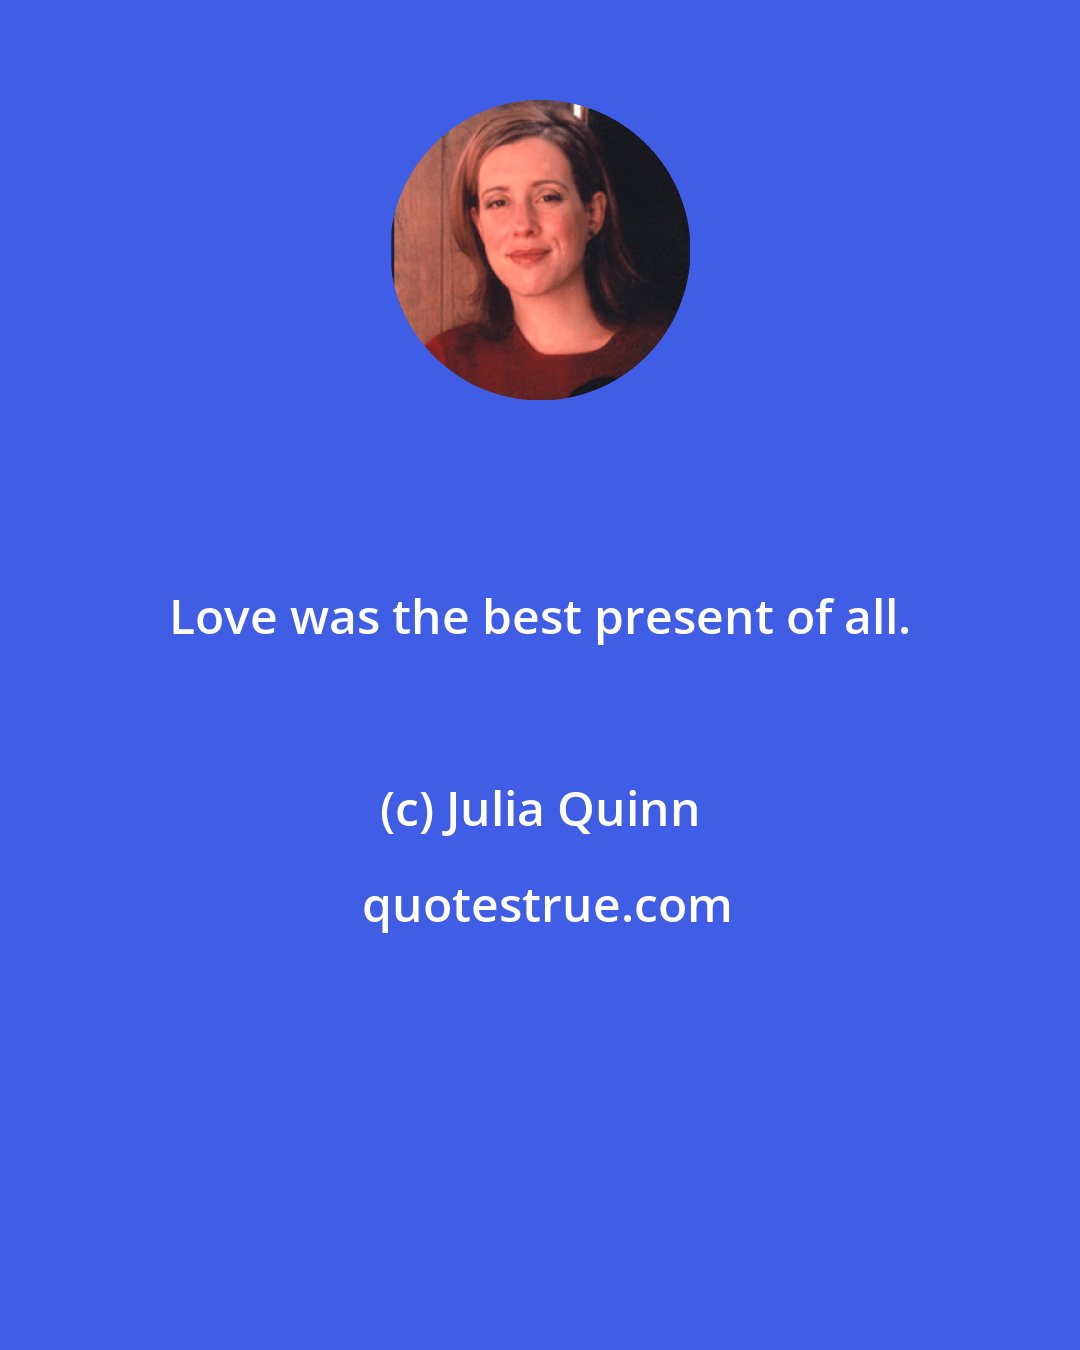 Julia Quinn: Love was the best present of all.